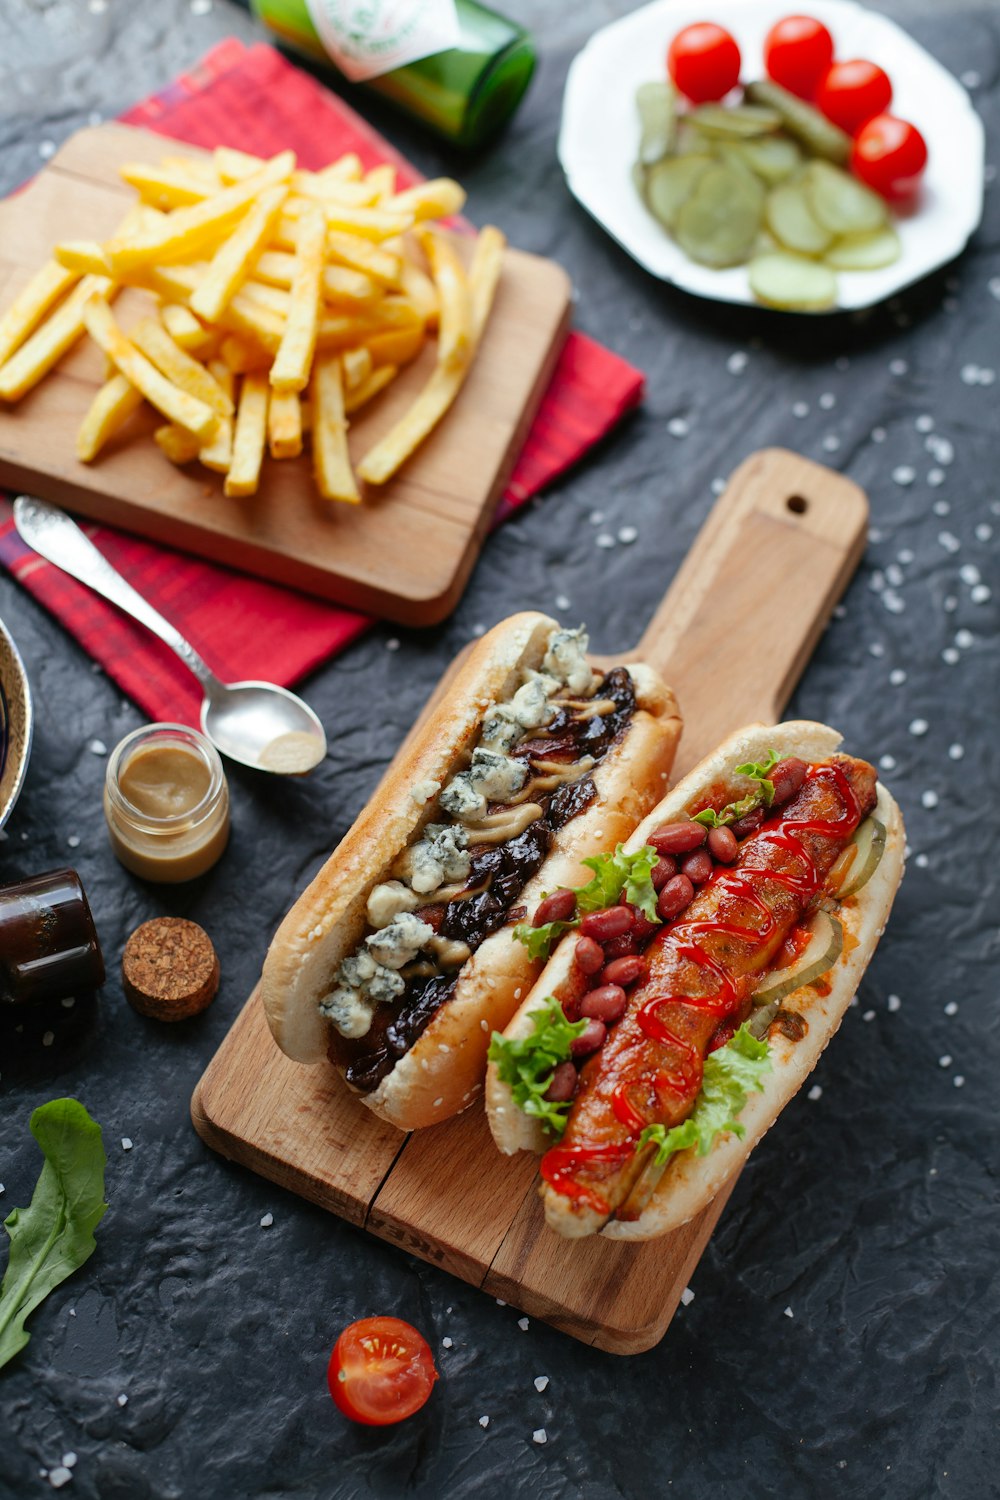 500 Hot Dog Pictures Hd Download Free Images On Unsplash Images, Photos, Reviews